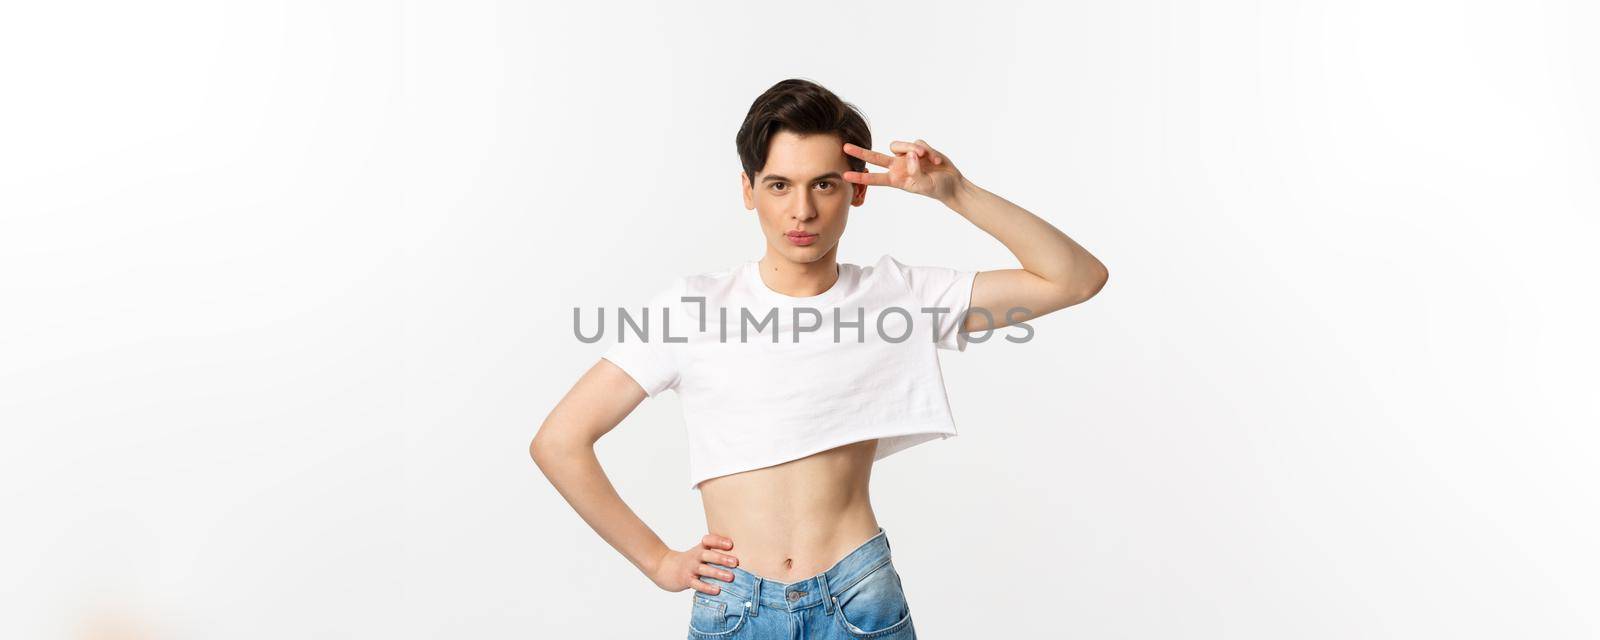 Beautiful androgynous man in crop top showing peace sign and smiling, standing over white background.